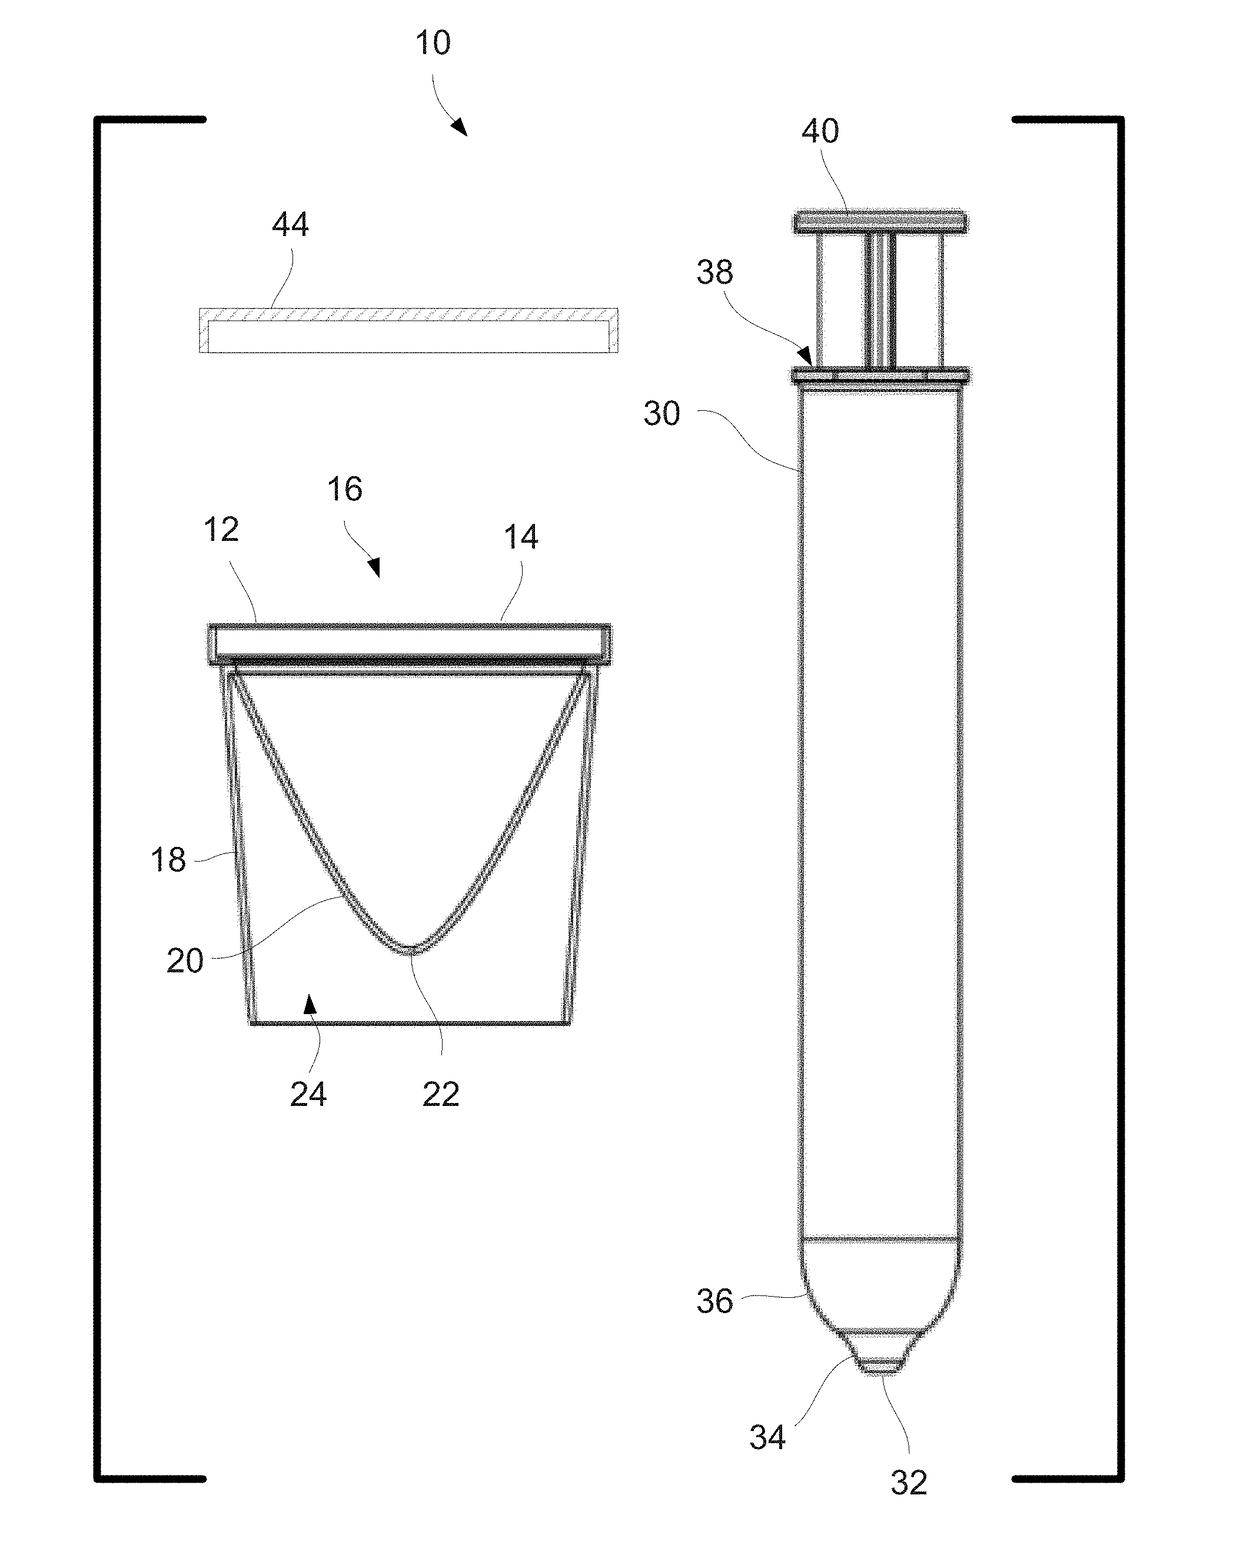 Bodily fluid collection system